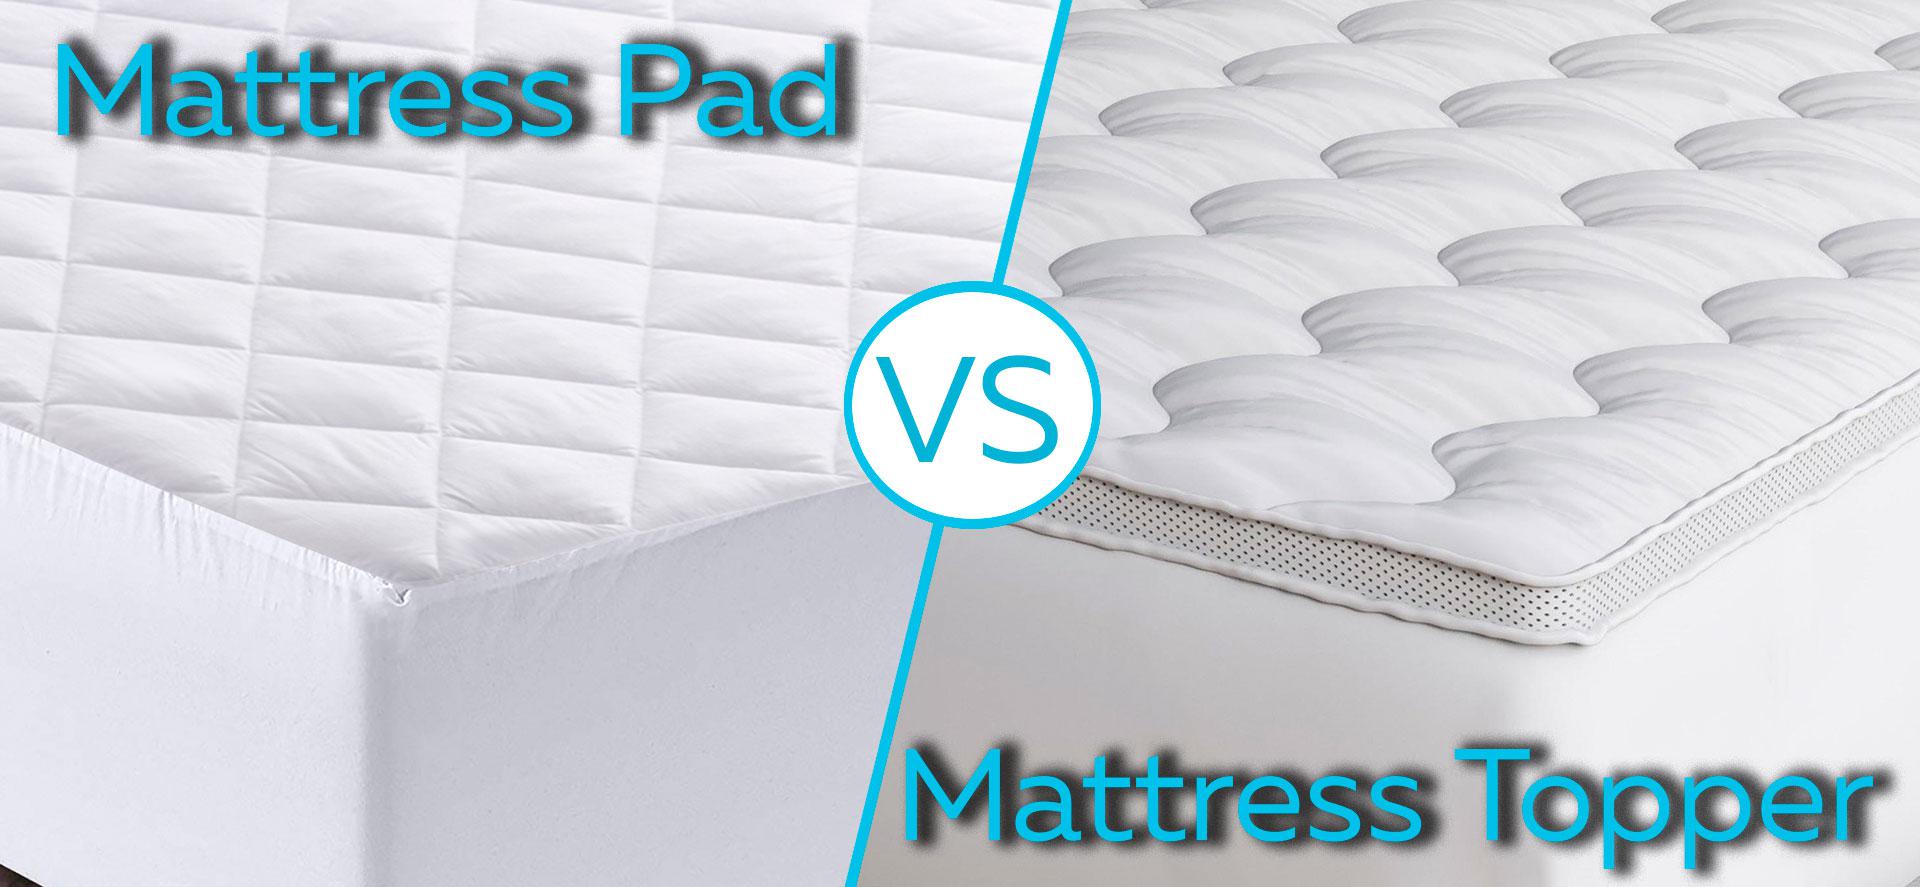 Comparison of Mattres Pad and Mattress Topper.